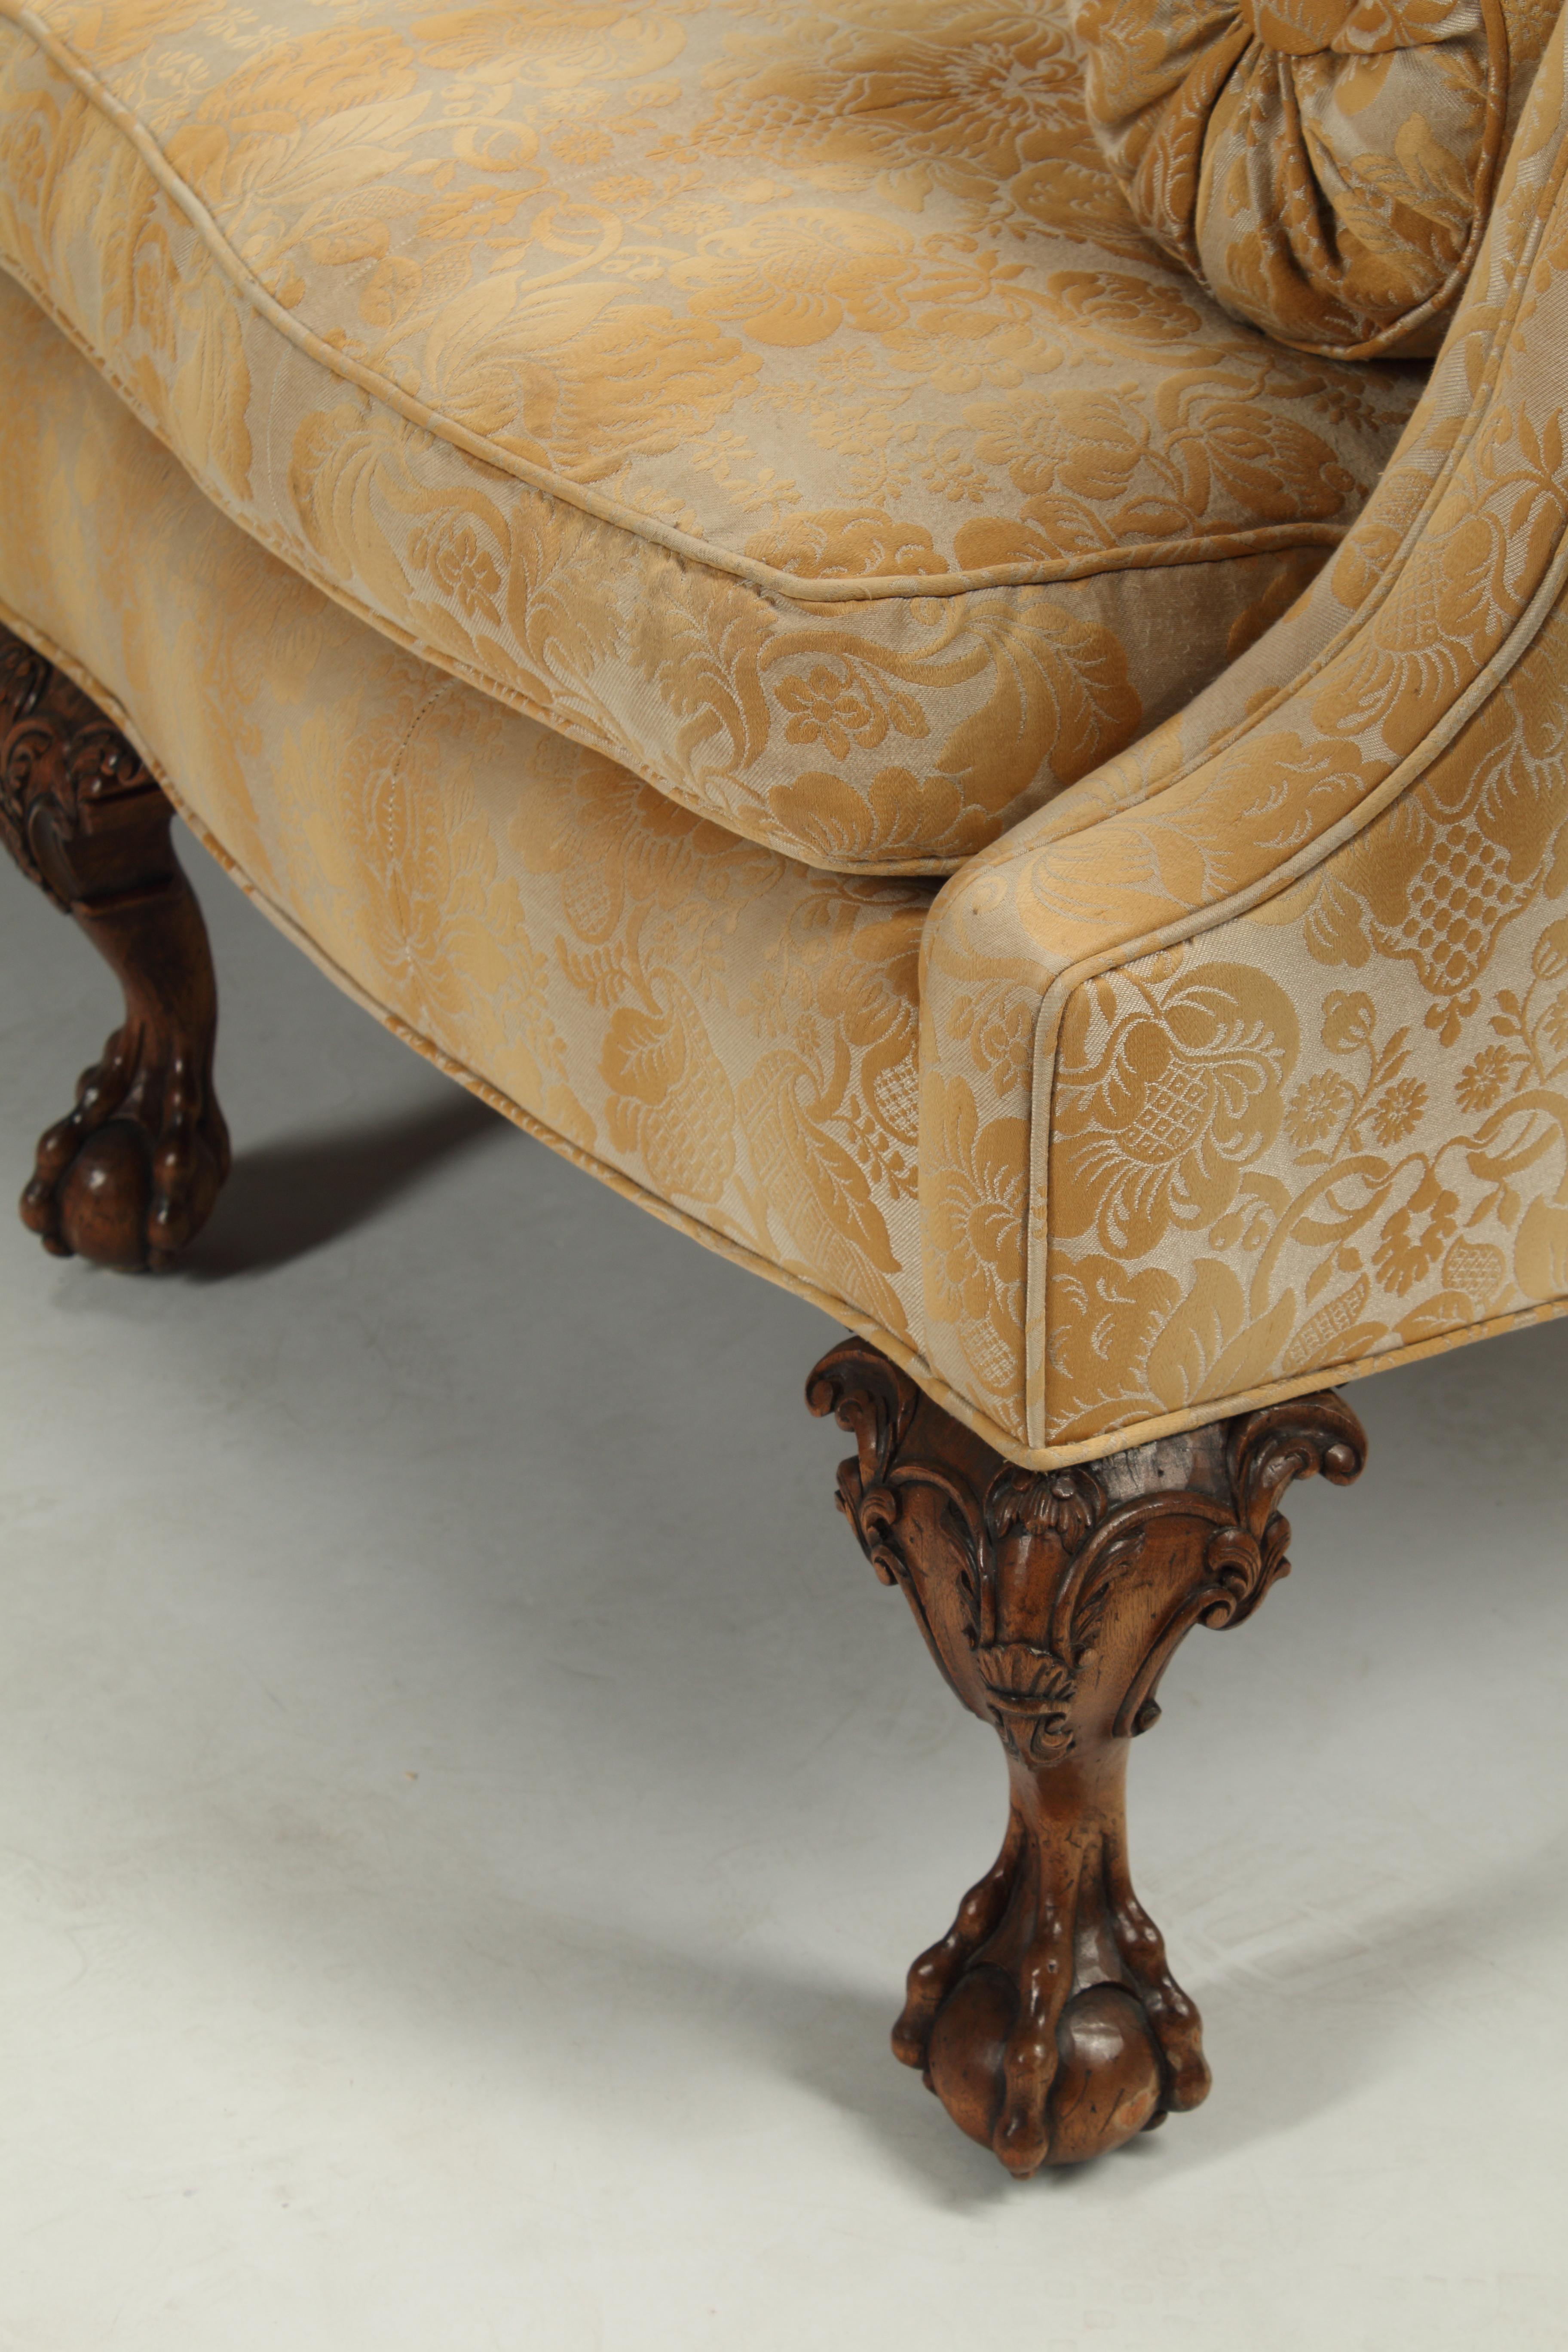 An elegant pair of English George II style camel back sofas with eight finely carved walnut claw and ball feet.
Upholstered with Scalamandré beautiful fabric in fair condition.